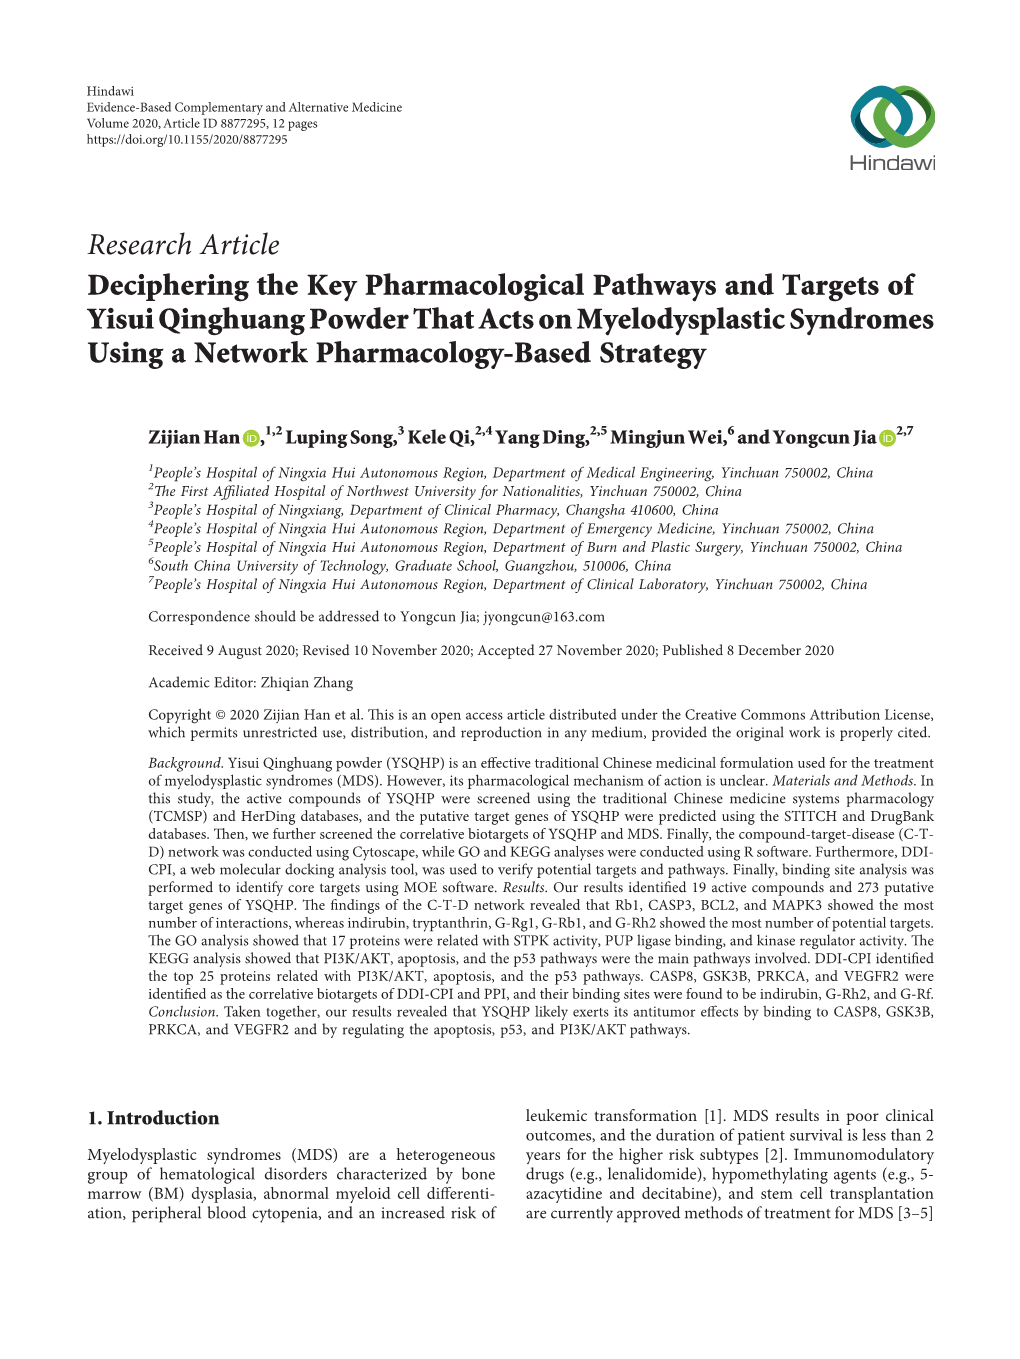 Research Article Deciphering the Key Pharmacological Pathways and Targets of Yisui Qinghuang Powder That Acts on Myelodysplastic